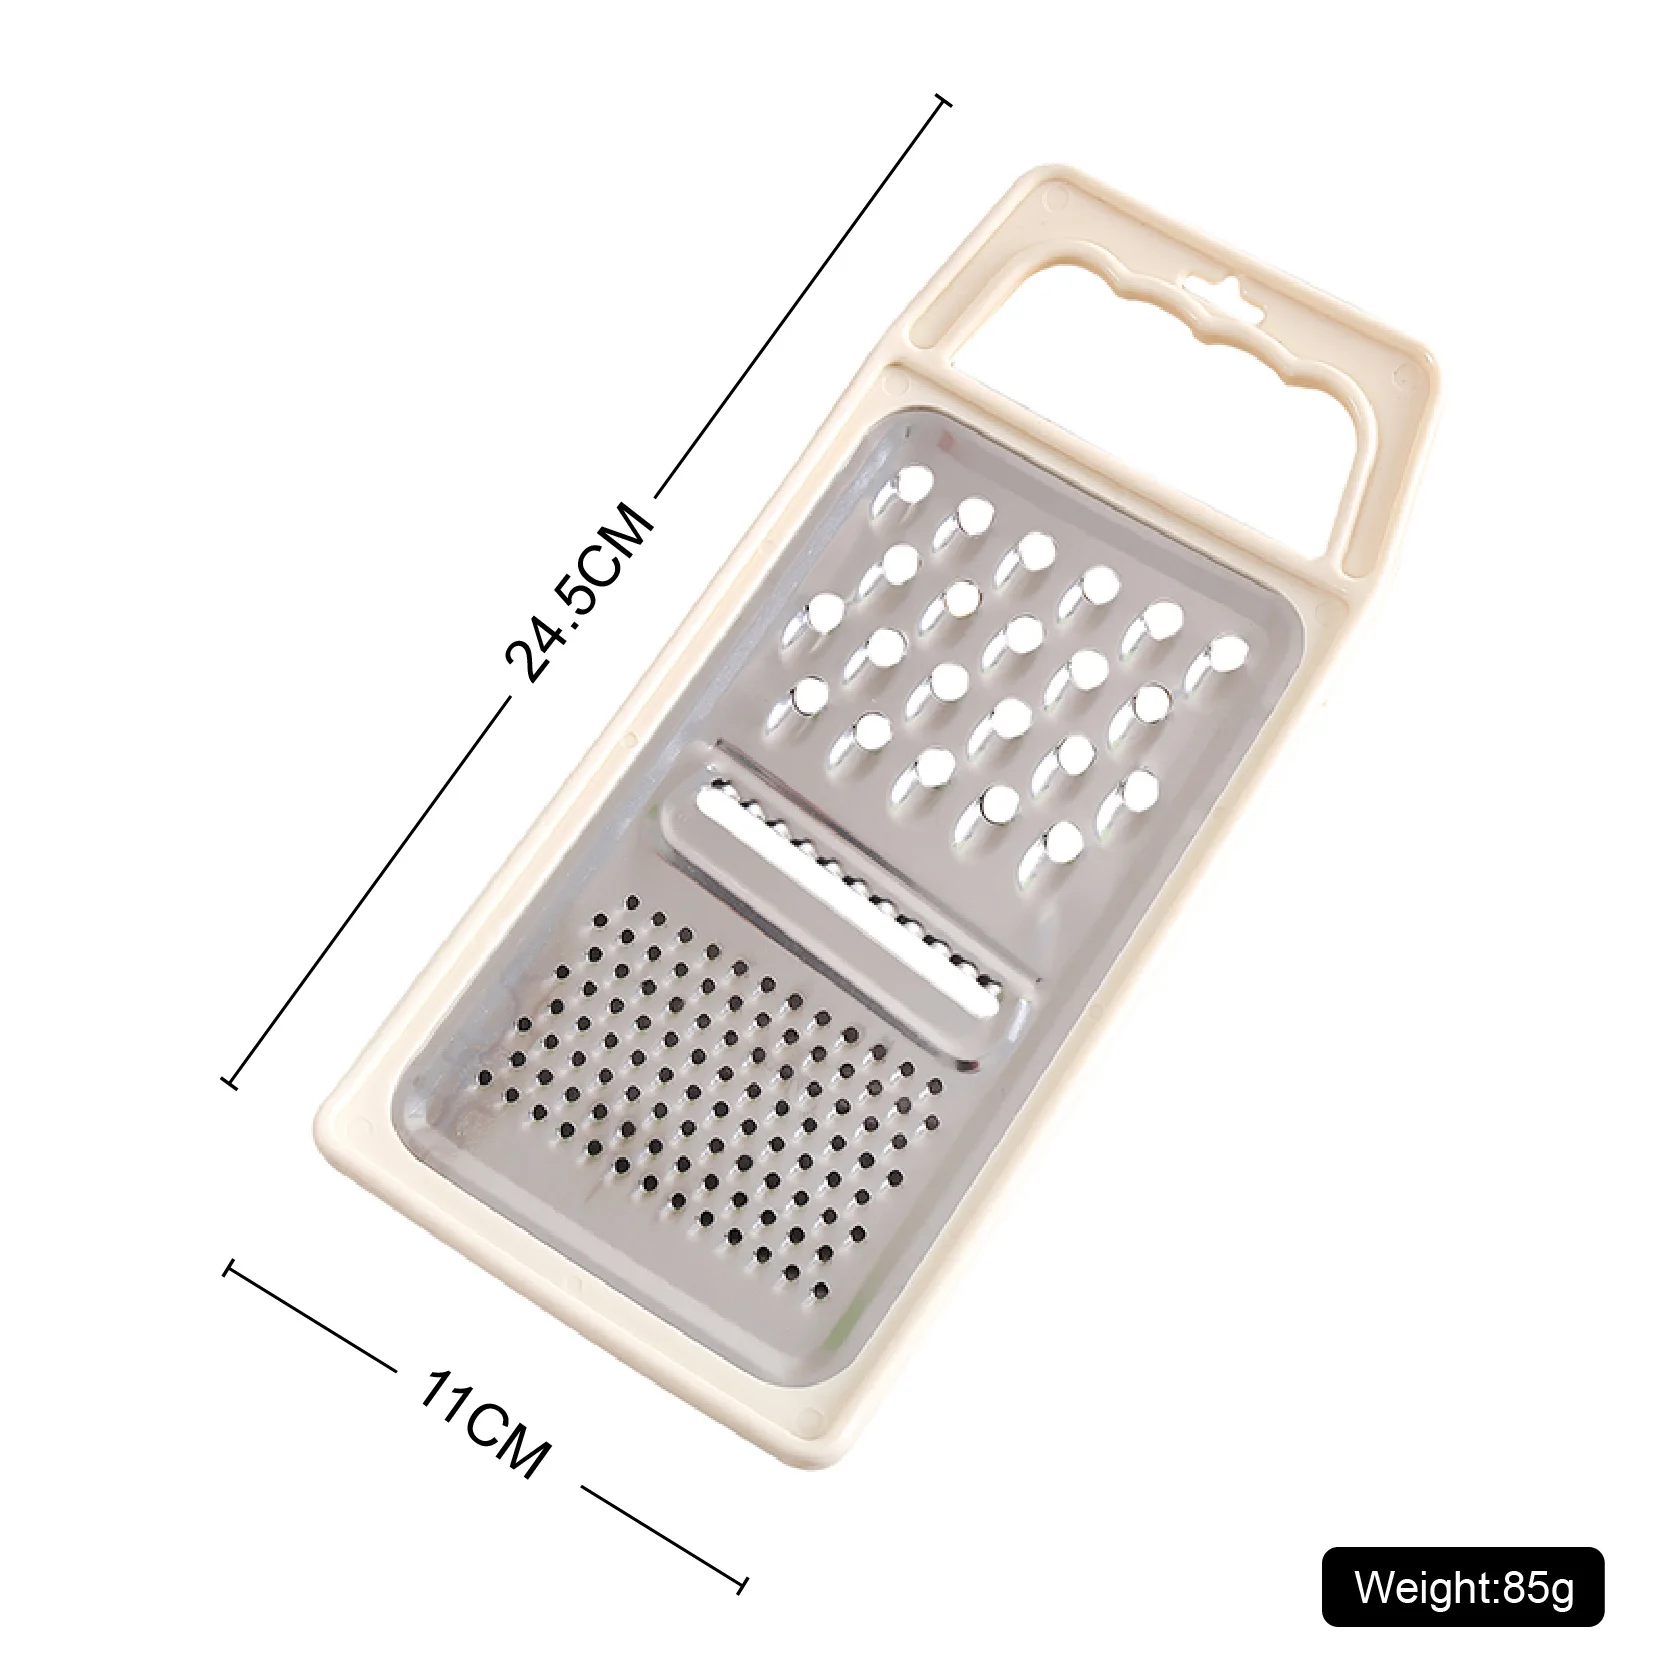 Food Grade Stainless Steel 3 in 1 Kitchen Flat Grater